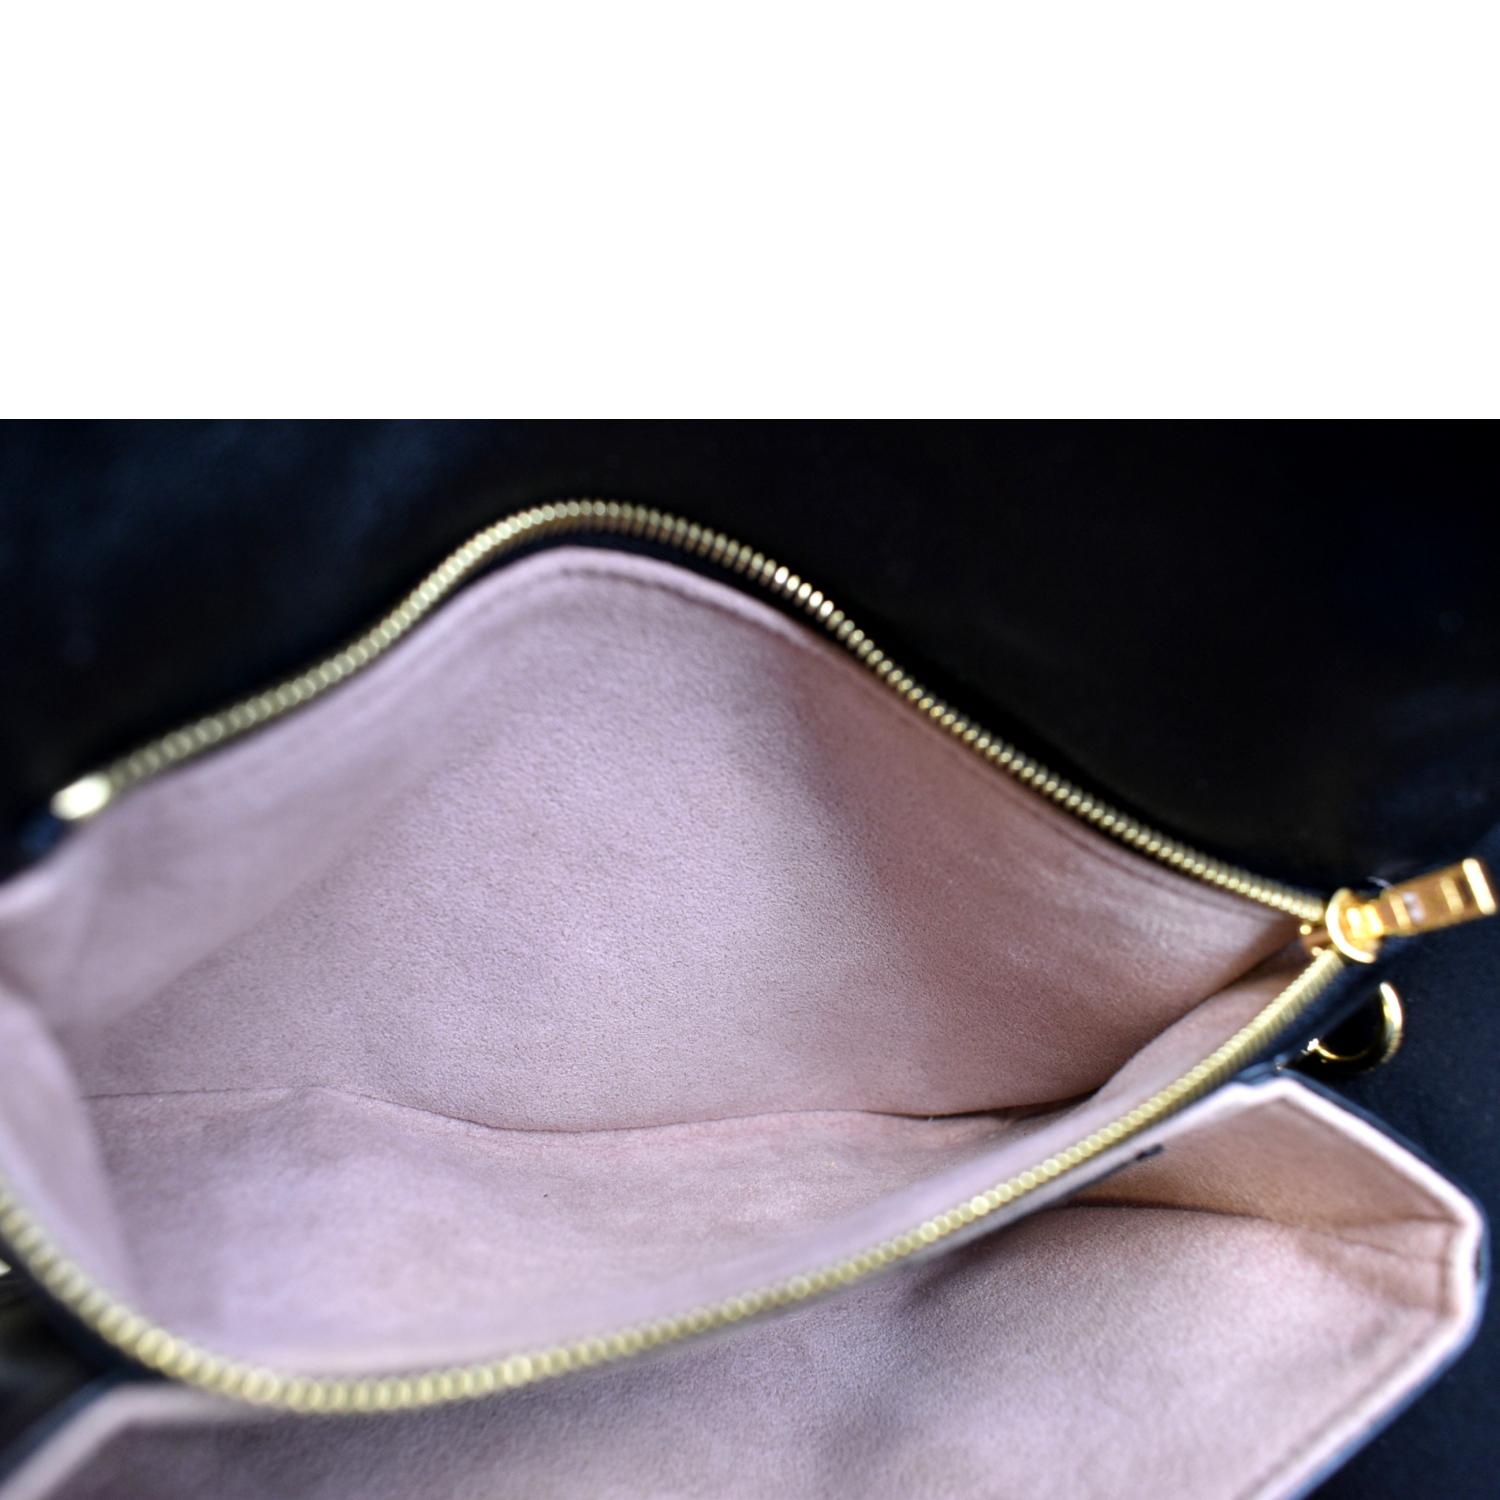 Beltbag Coussin Fashion Leather - Wallets and Small Leather Goods